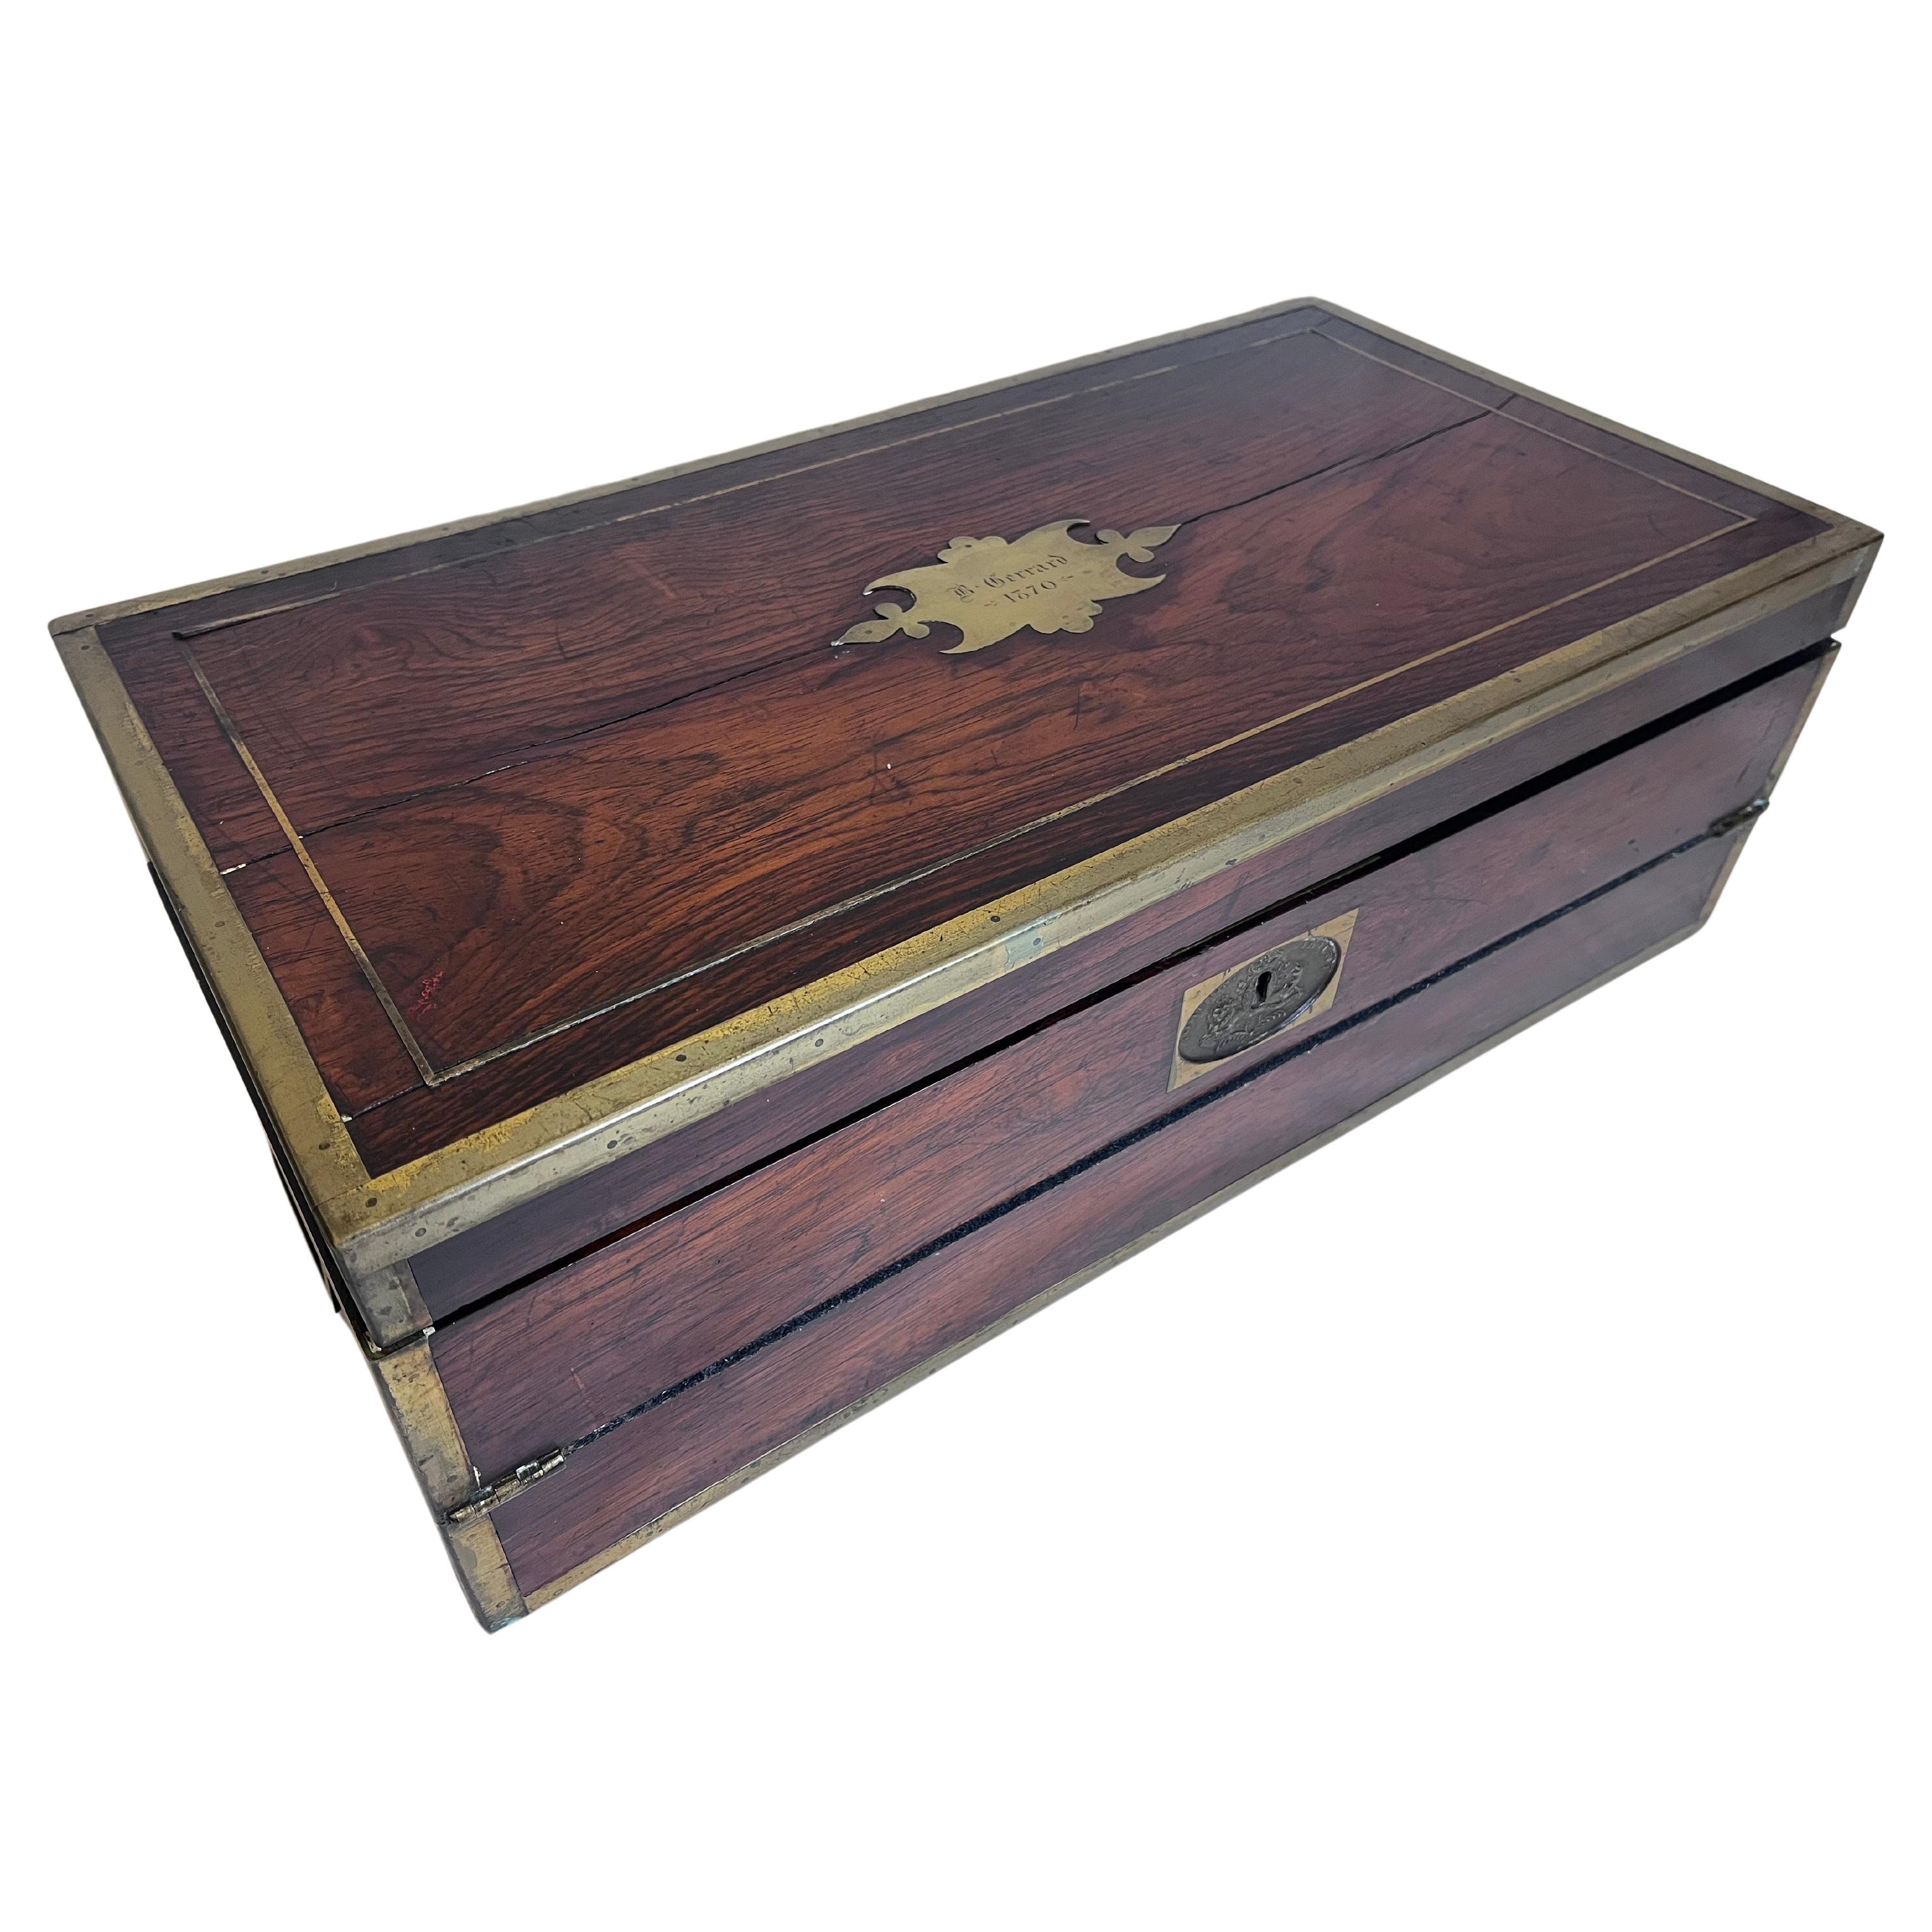 An antique, circa mid 19th Century English Military Campaign traveling writing or lap desk with brass details, a fitted leather and gilt interior, two ink bottles, pen tray and compartments under the fold out writing area. The campaign desk features